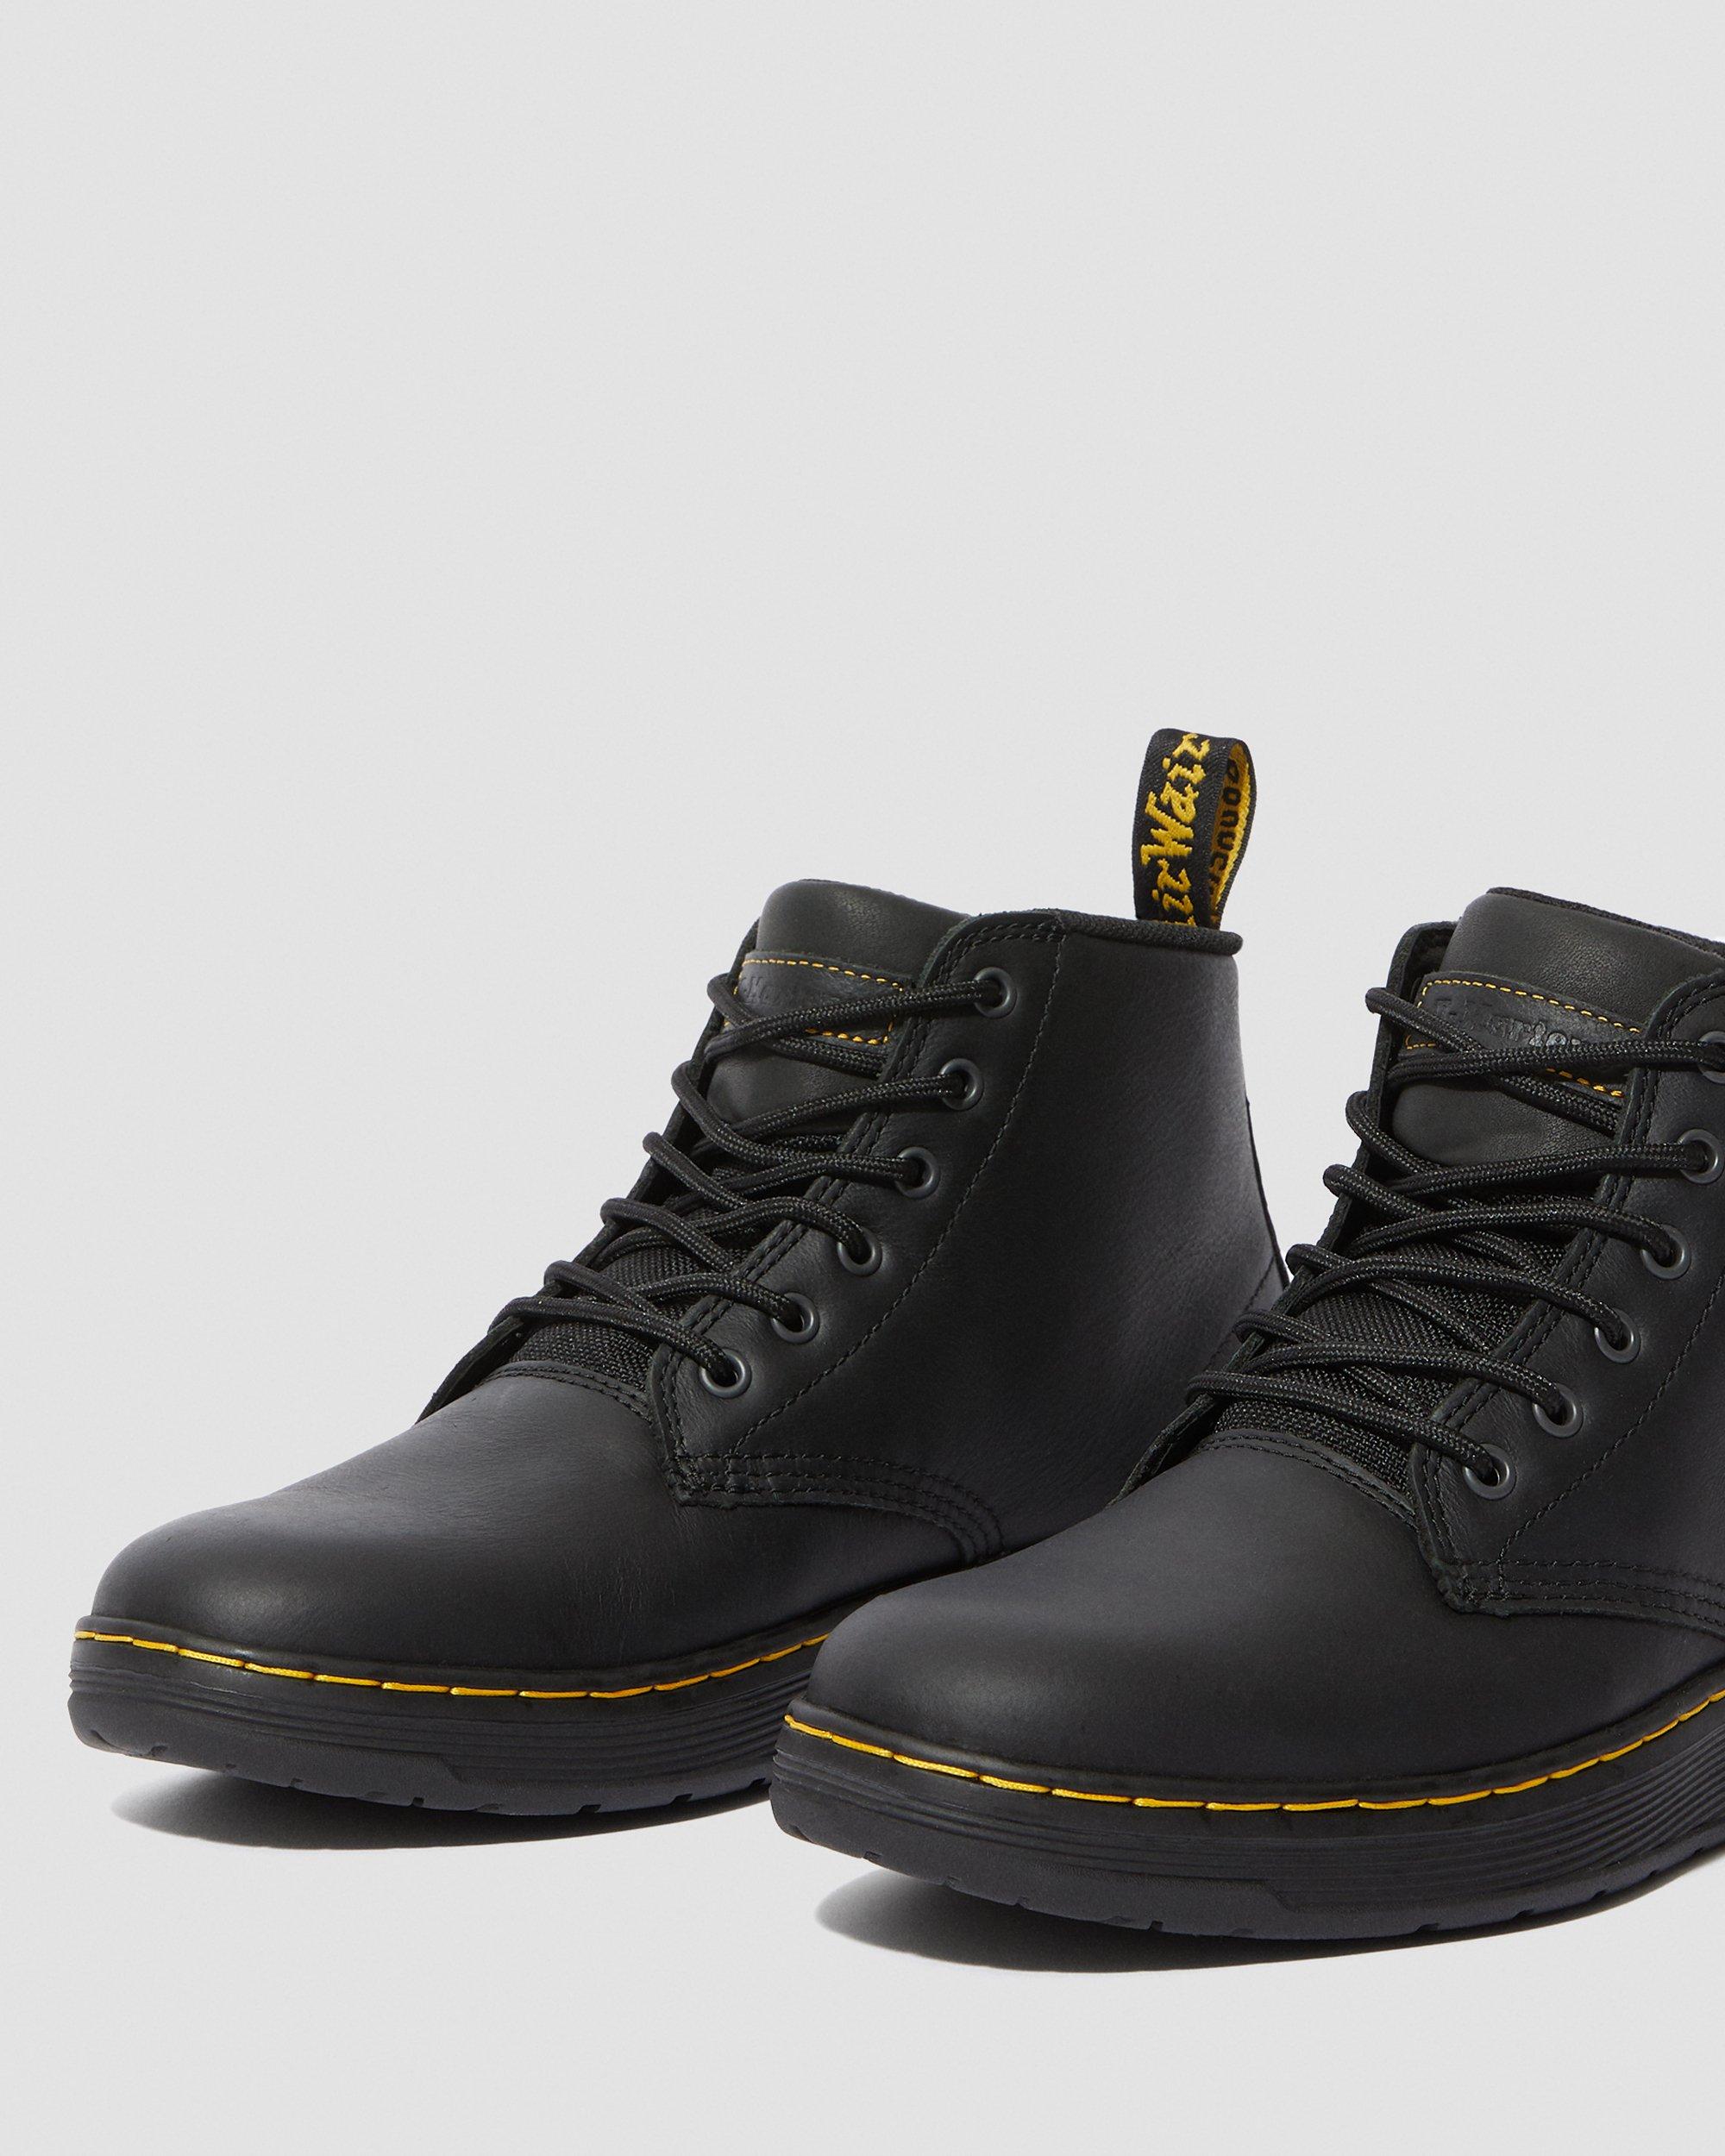 AMWELL NON SLIP LEATHER LACE UP BOOTS Dr. Martens